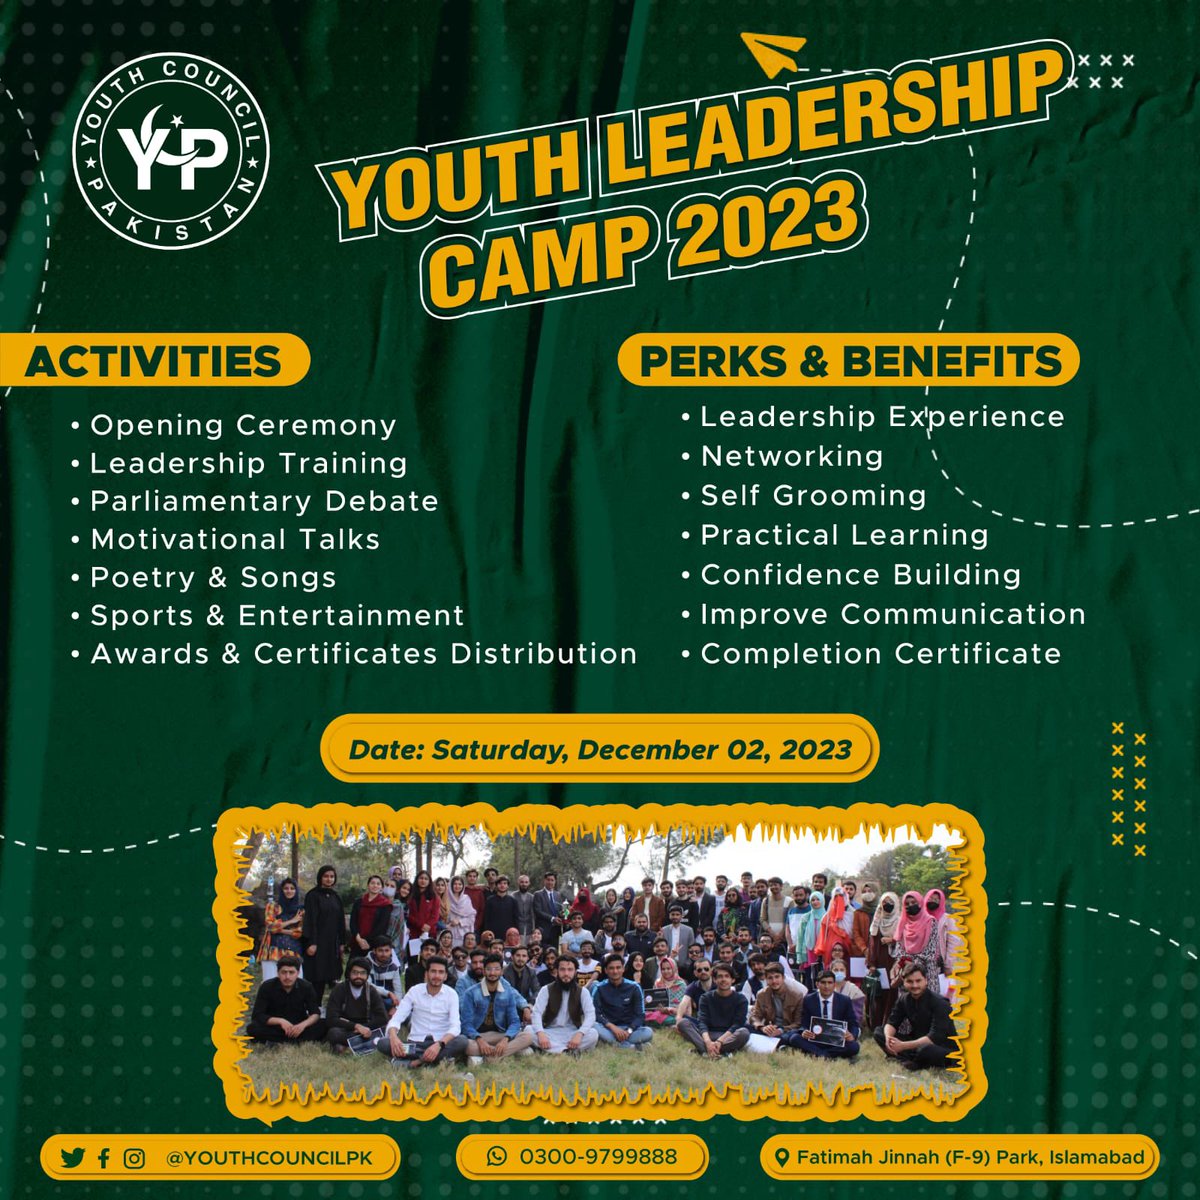 YOUTH LEADERSHIP CAMP 2023

YCPians the wait is over! A dynamic, knowledgeable and full of fun leadership camp is ahead. To skip YLC is to loss the great experience of the year! So register yourself right now.
@MShehzadKhanPK 
@YouthCouncilPK